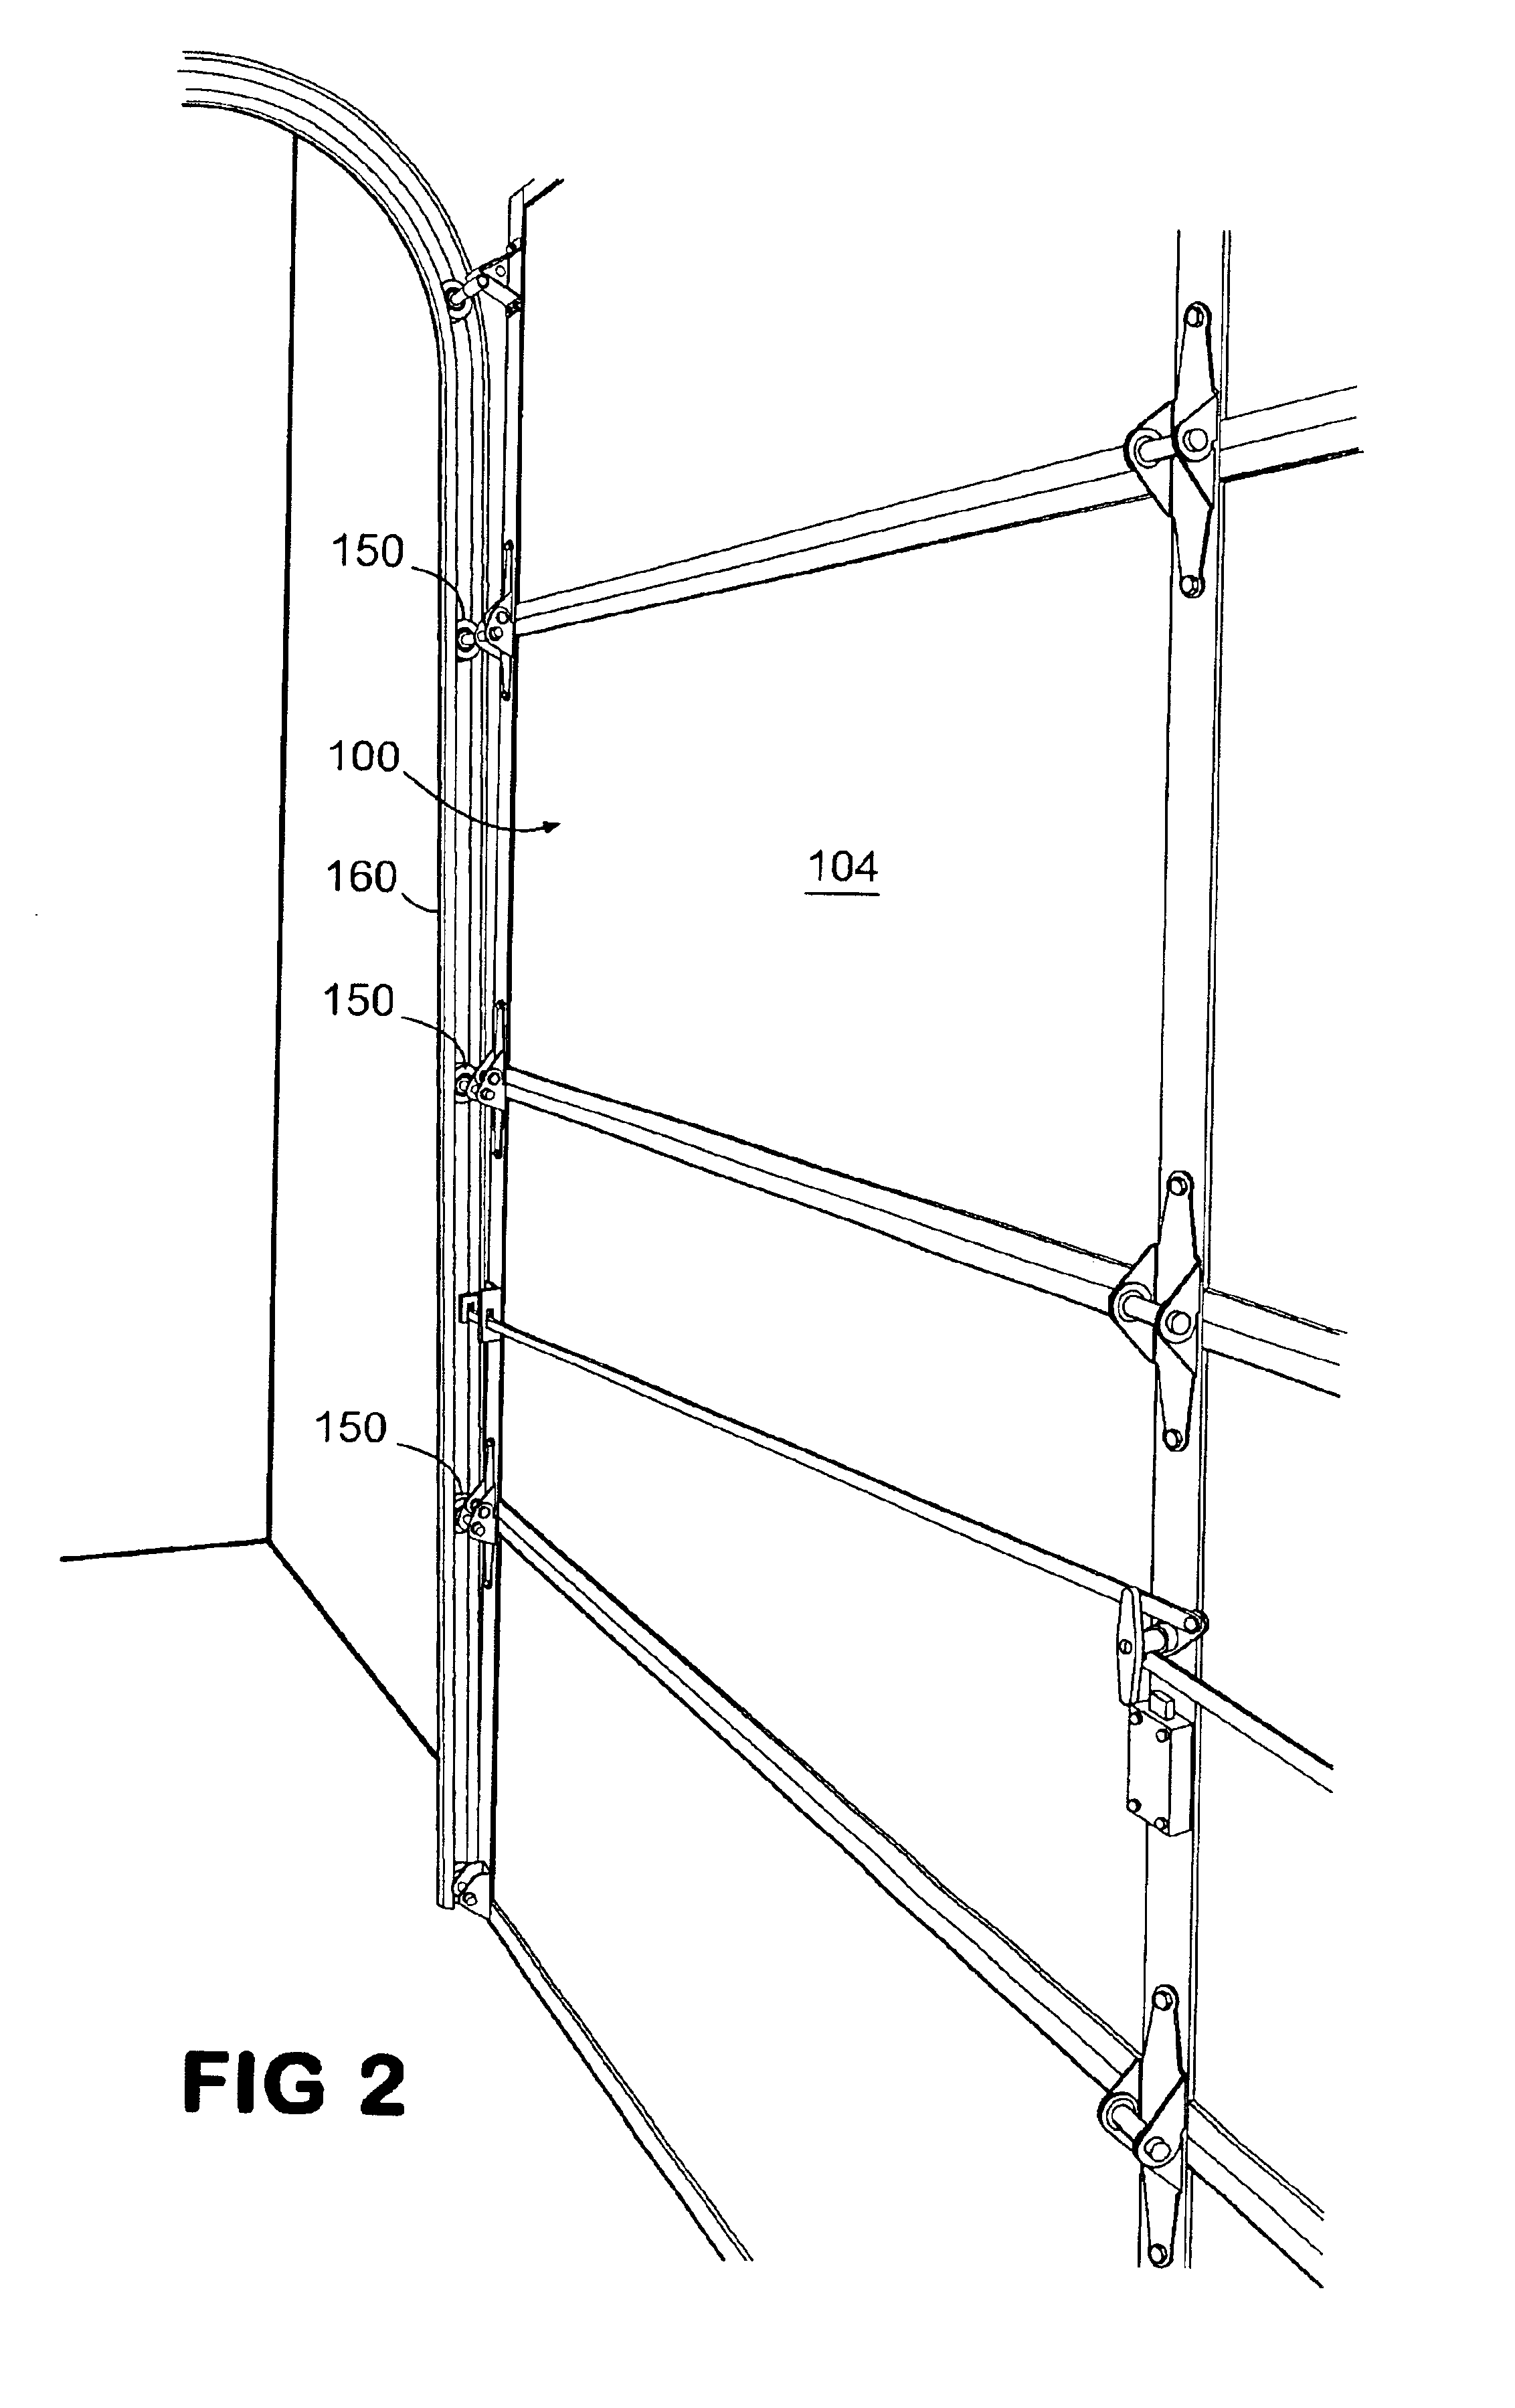 Actuator for improving seal for overhead doors